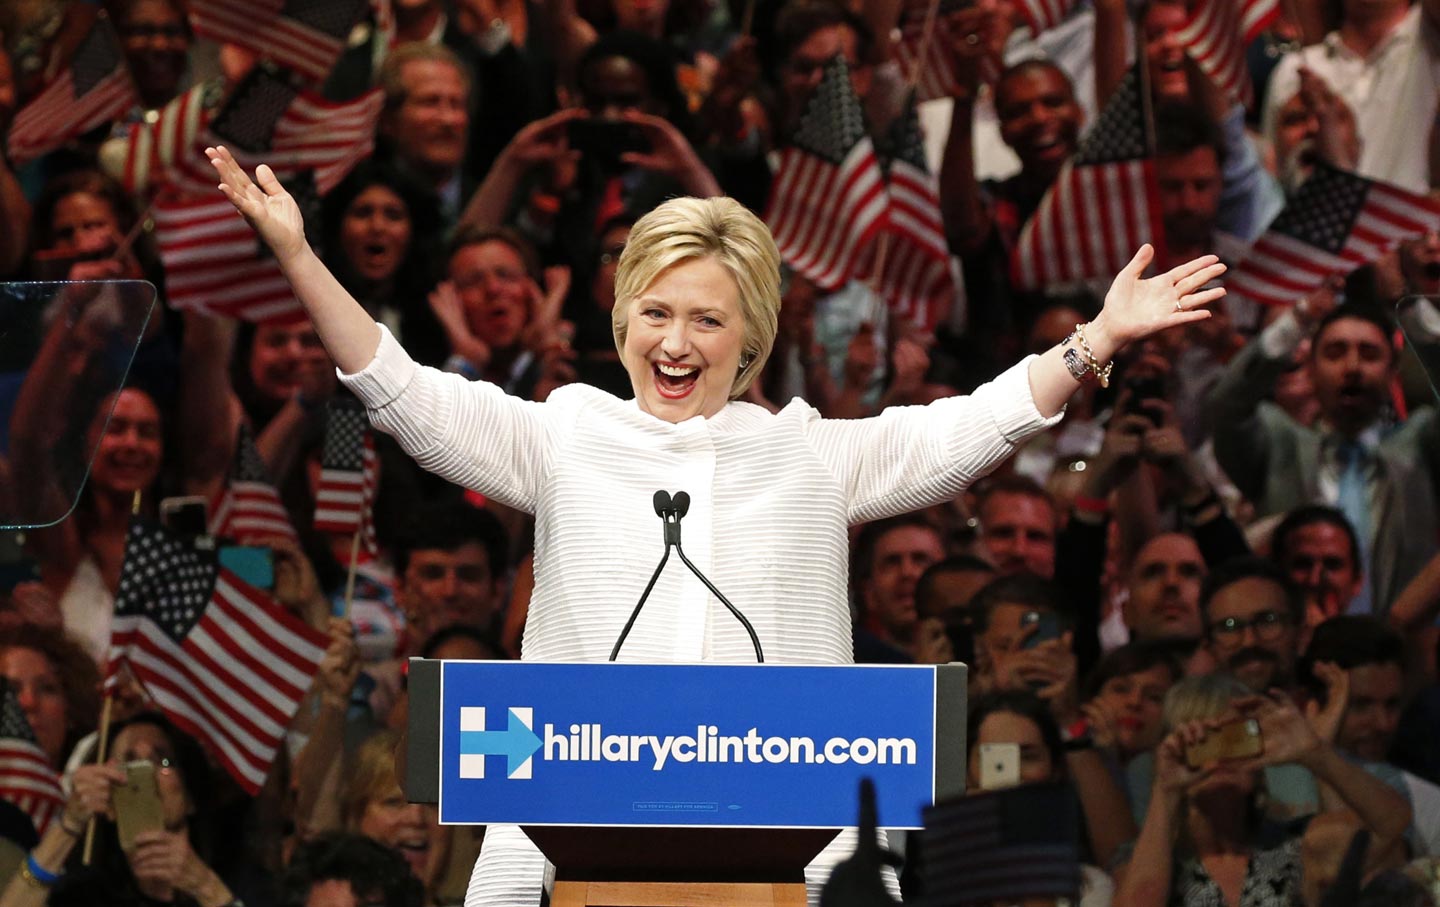 Hillary Clinton Can Become the Real Candidate of Change